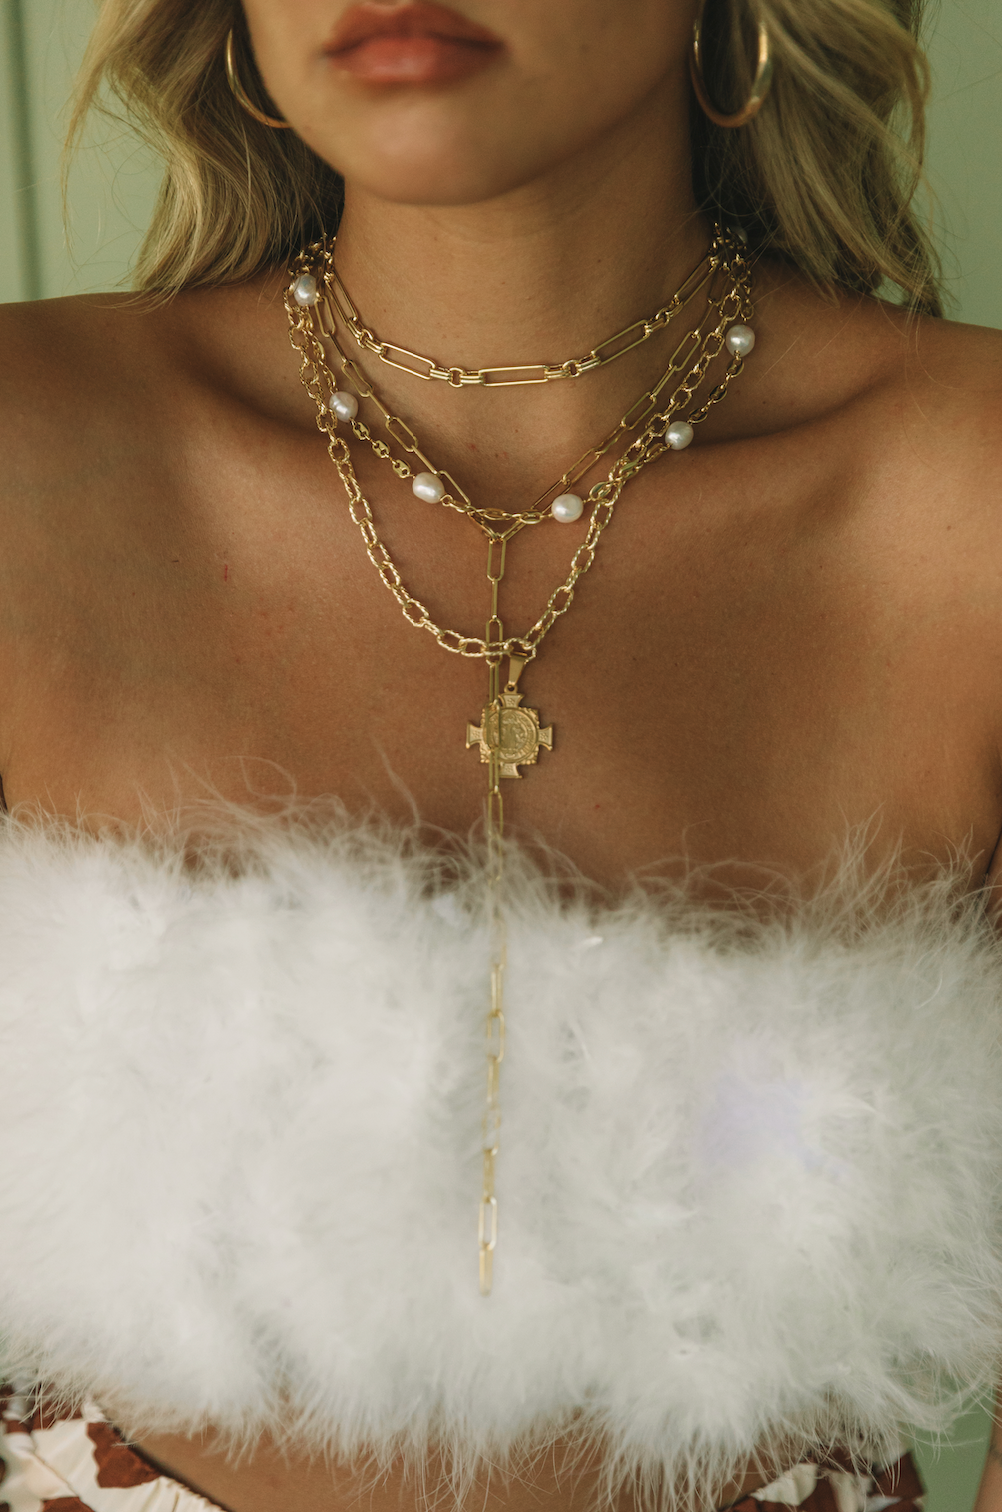 The Pearly Gold Necklace